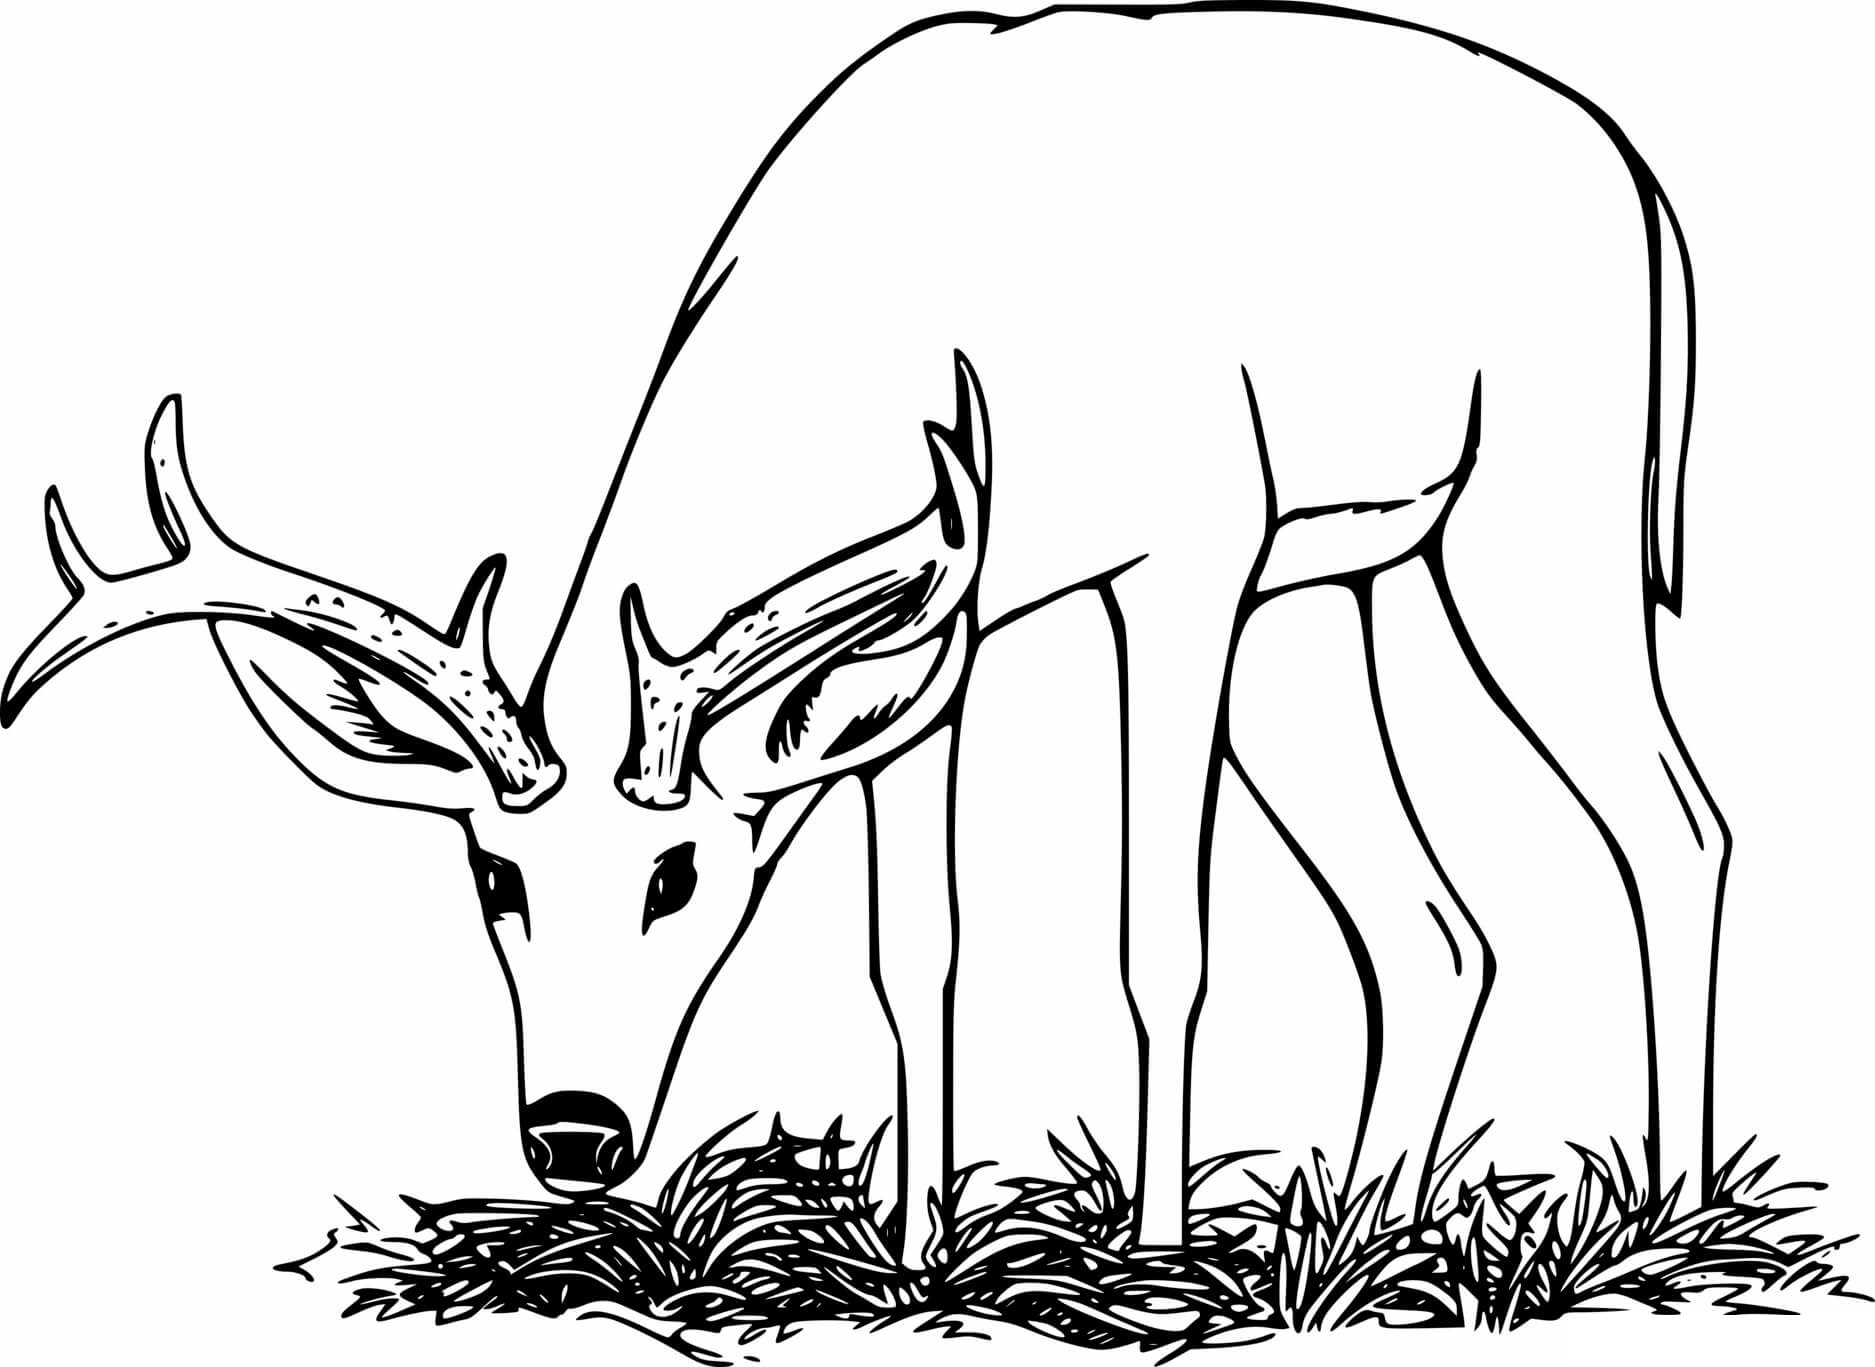 Realistic Deer Eating Grass Coloring Page